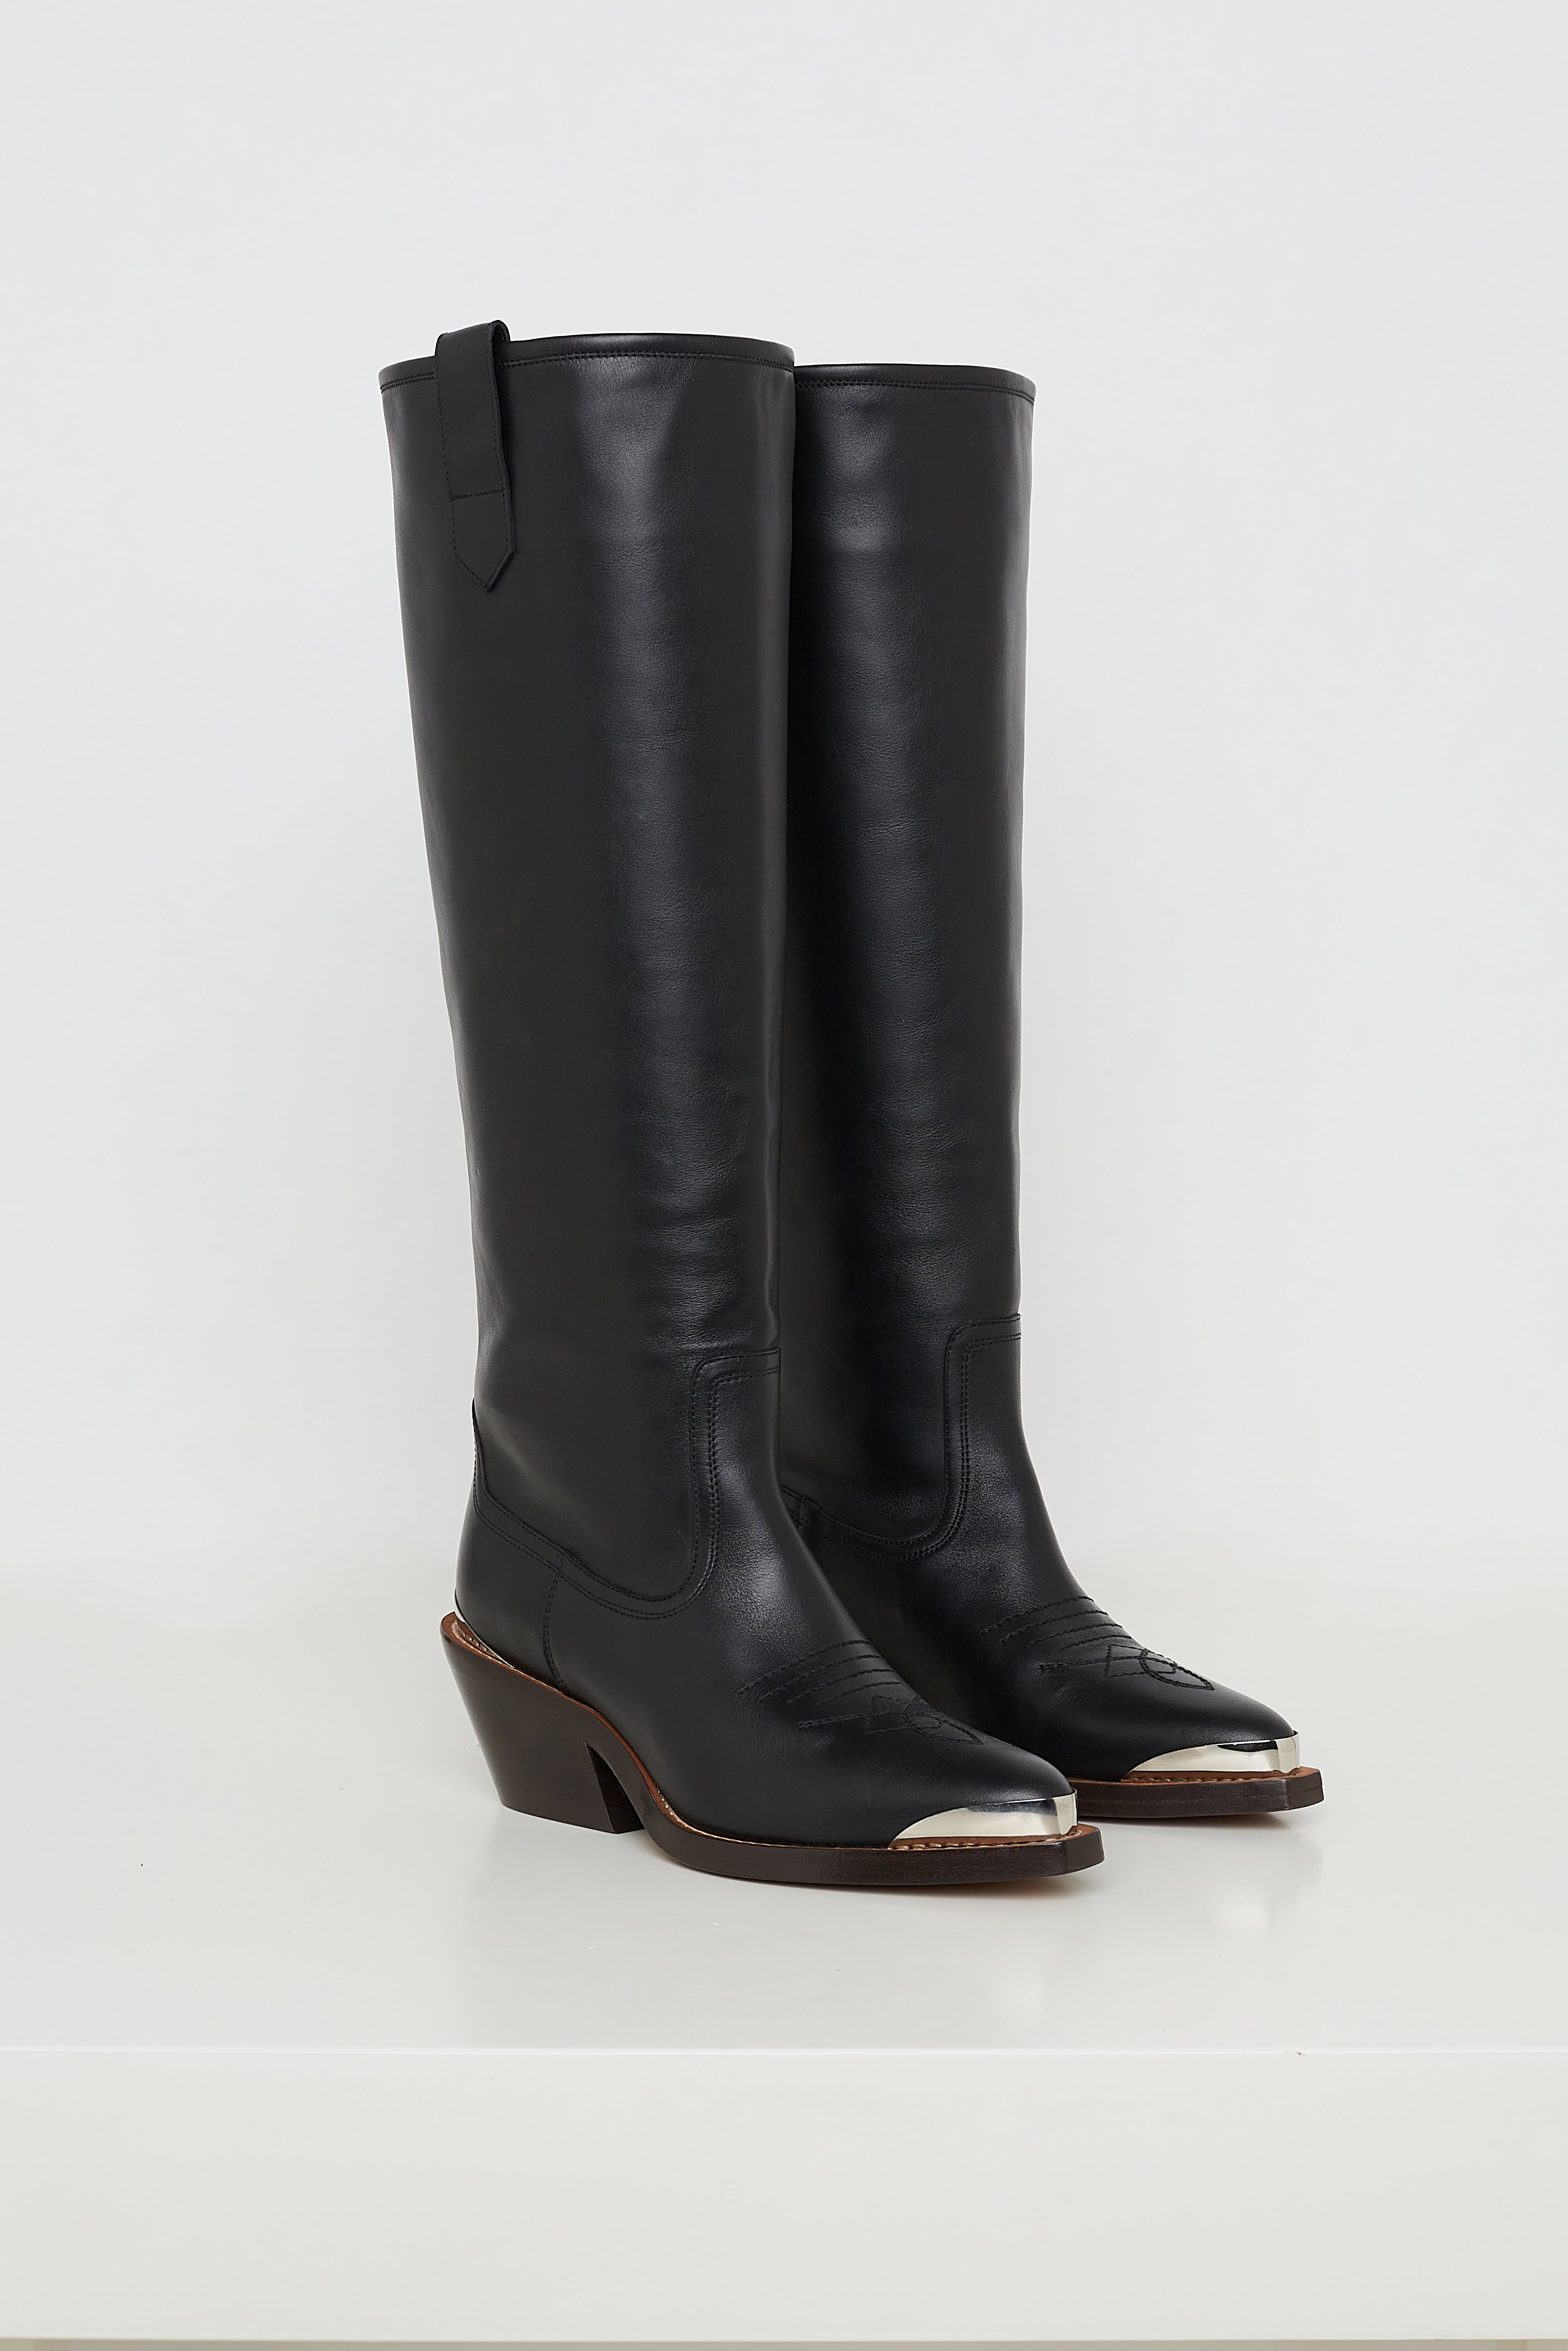 Dorothee-Schumacher-OUTLET-SALE-WESTERN-SUMMER-Tall-Boot-Stiefel-Stiefeletten-ARCHIVE-COLLECTION_ac4ecc68-accc-4873-be35-683b10f9e5c2.jpg